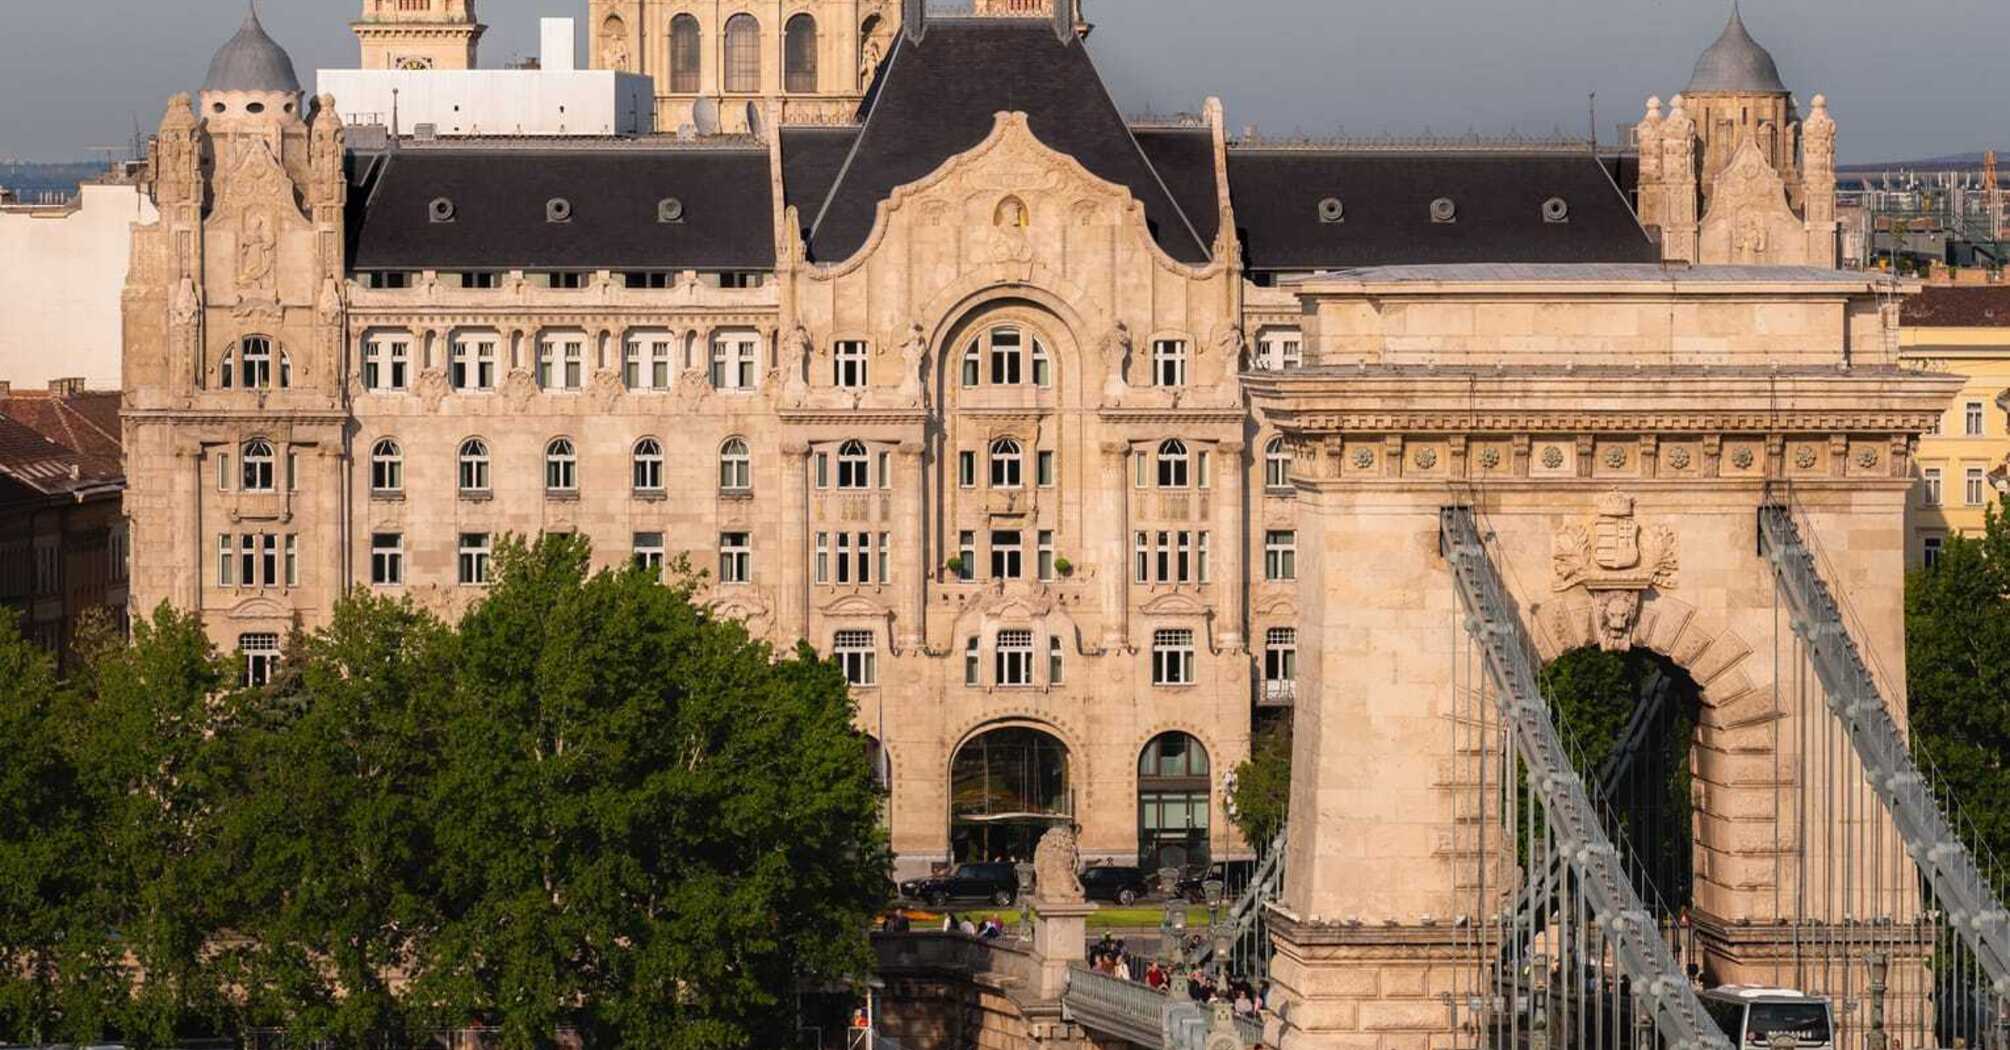 The hotels in Budapest have made it to the annual list of the best hotels in the world